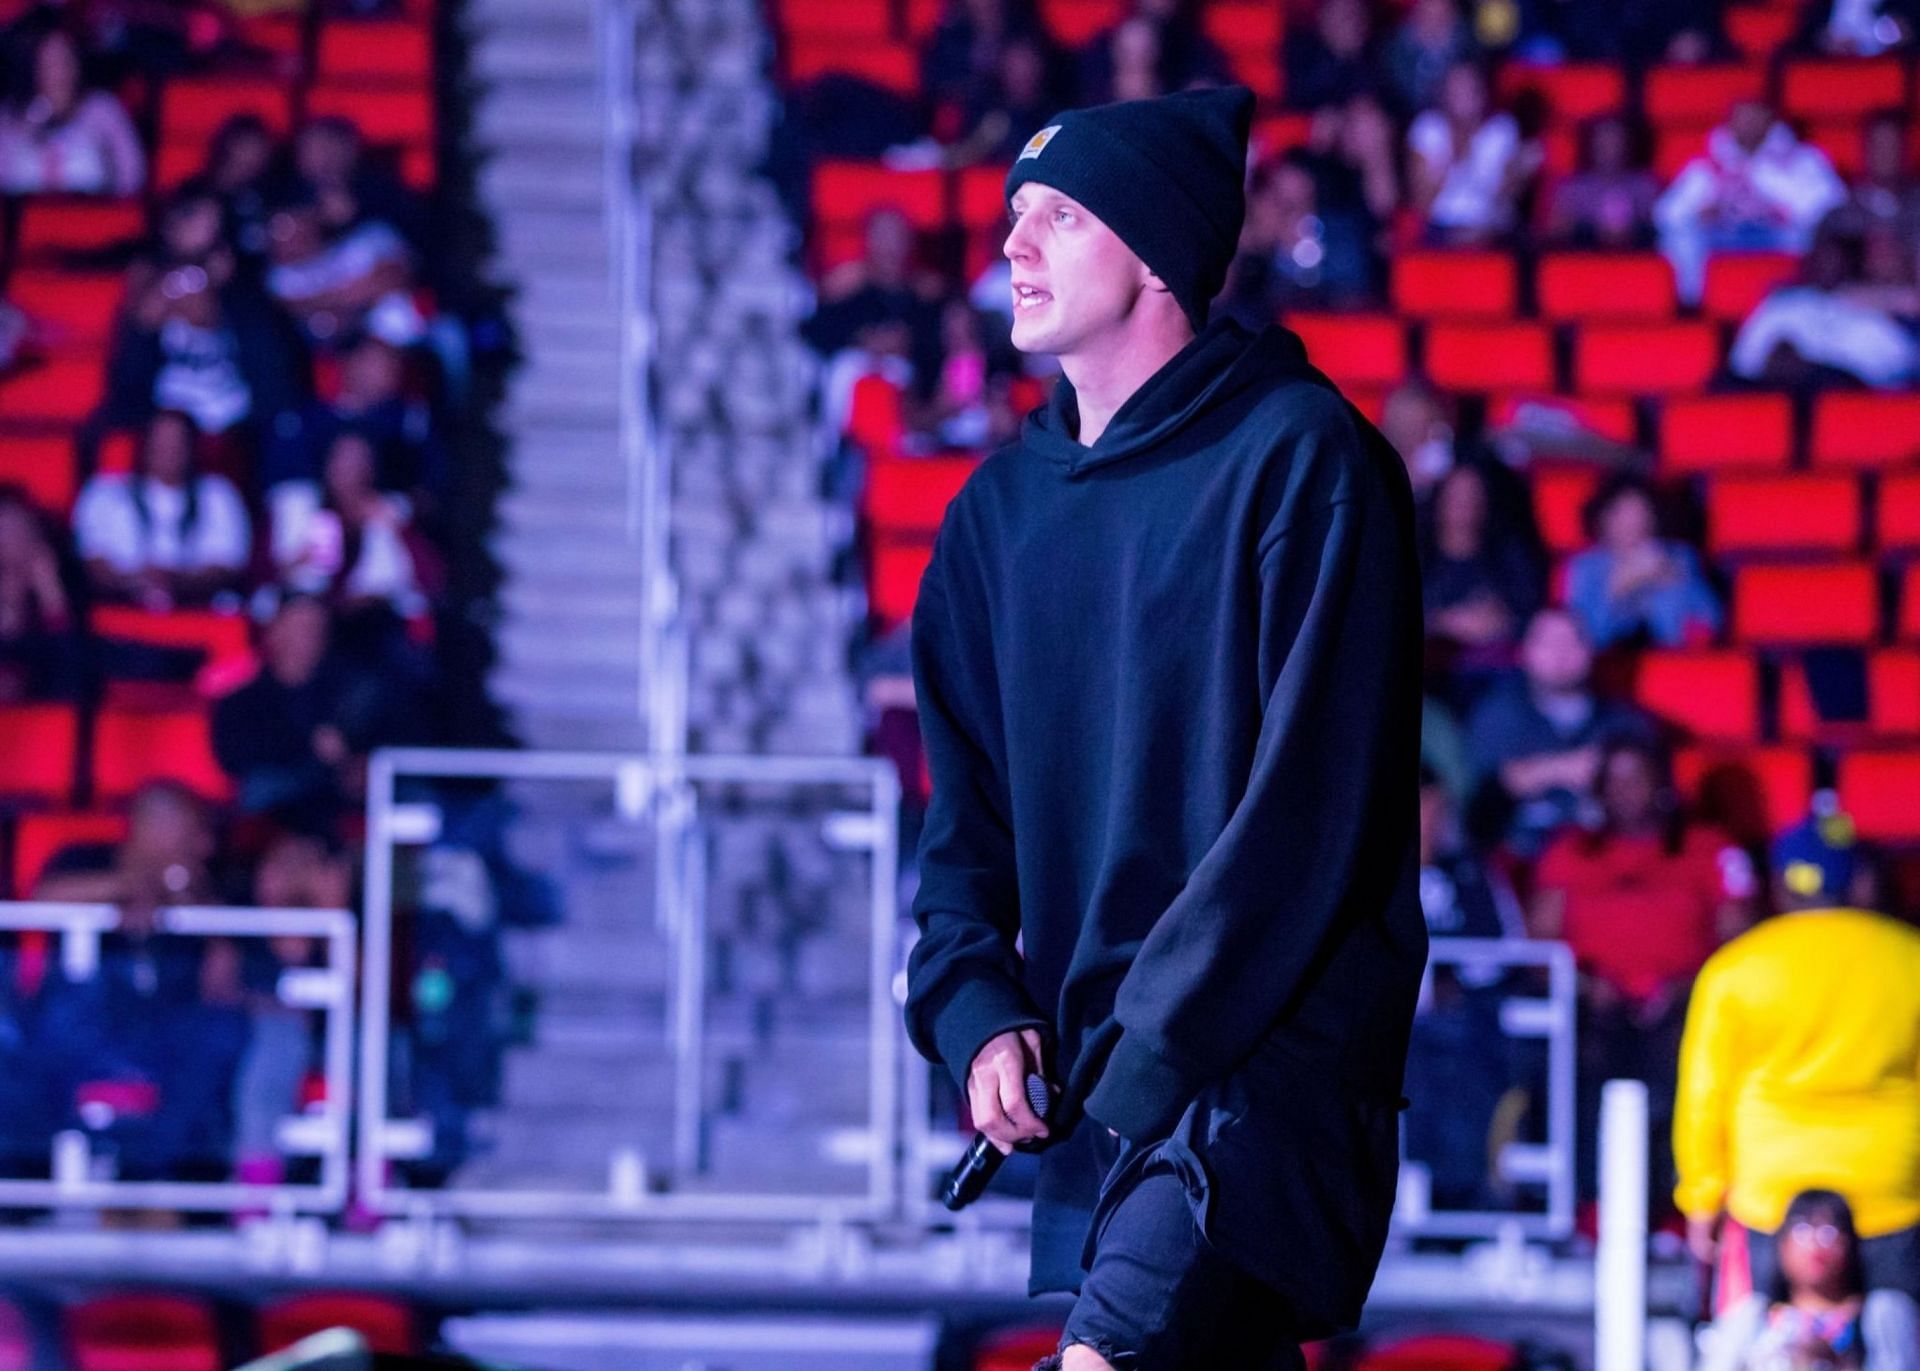 NF at  the Big Show at Little Caesars Arena on December 28, 2017 in Detroit, Michigan(Image via Getty Images)